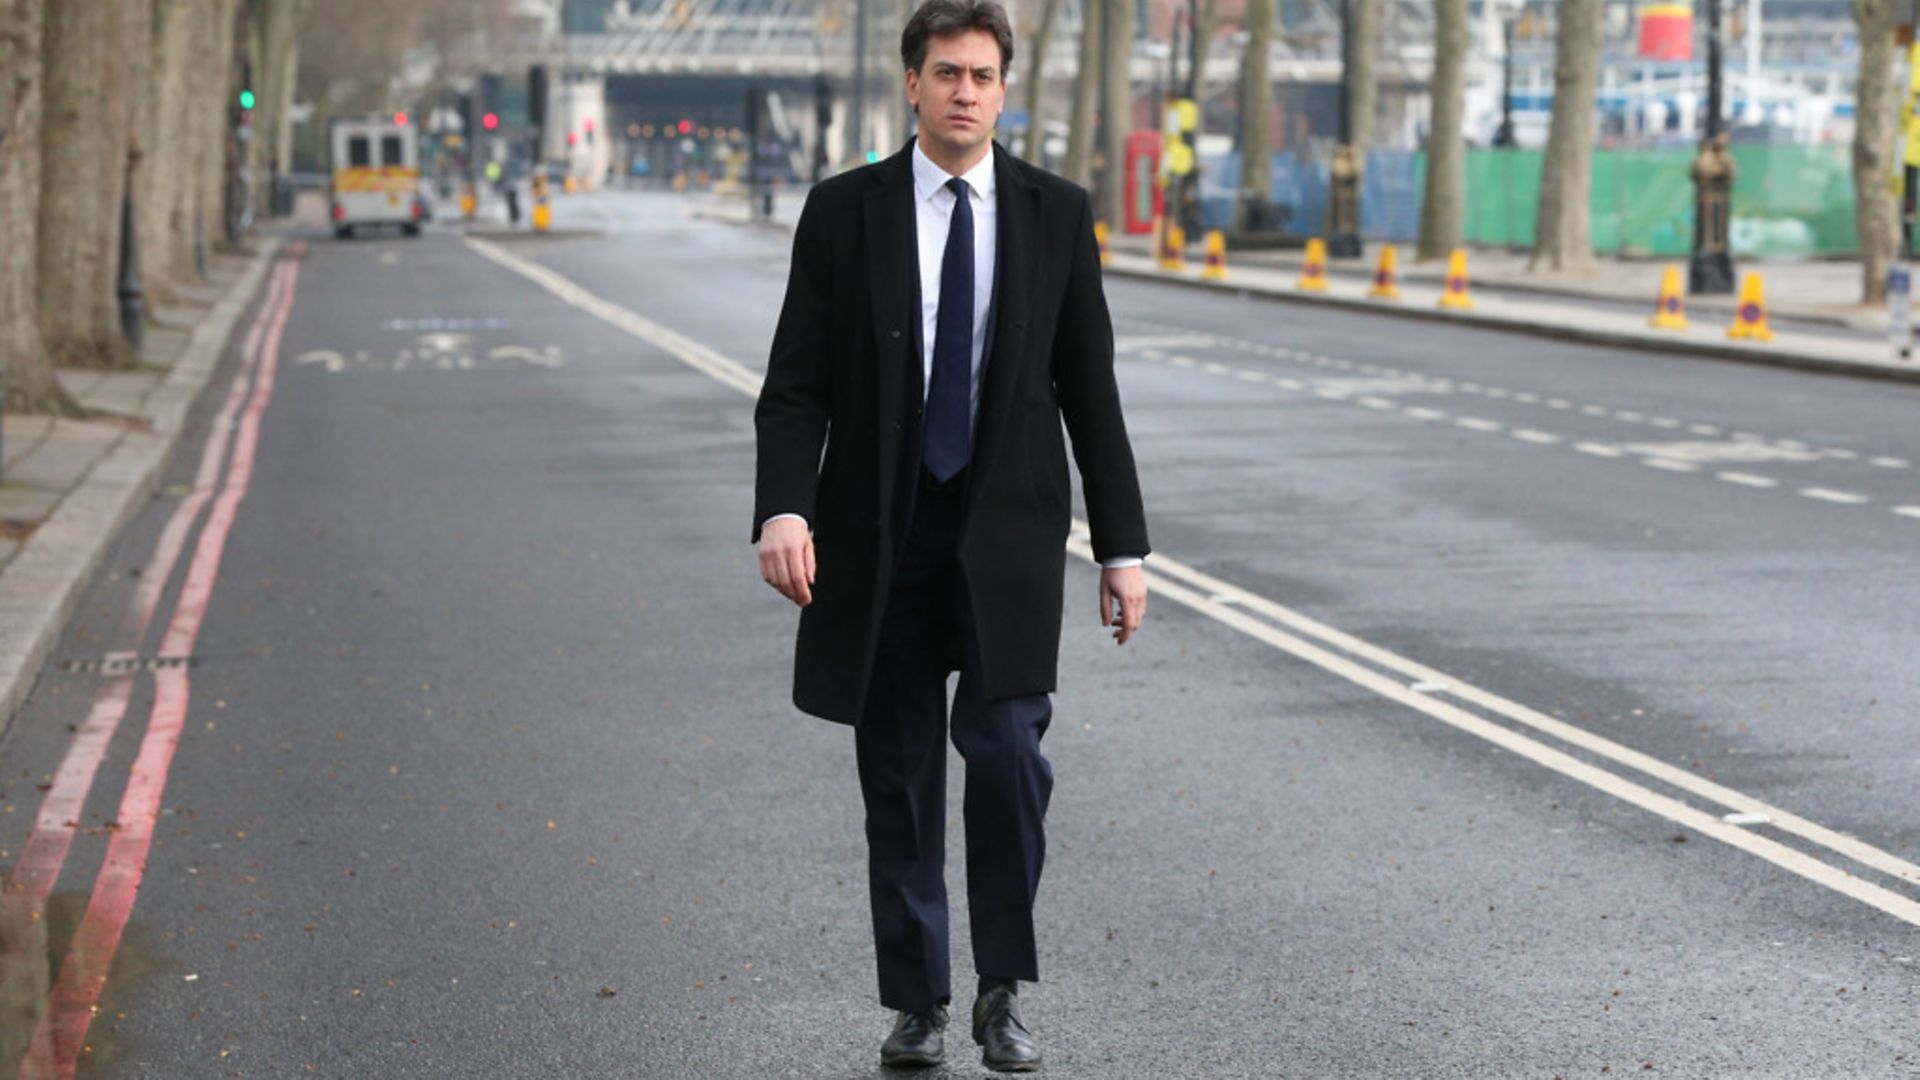 Former Labour party leader Ed Miliband walks along Victoria Embankment in London. - Credit: PA